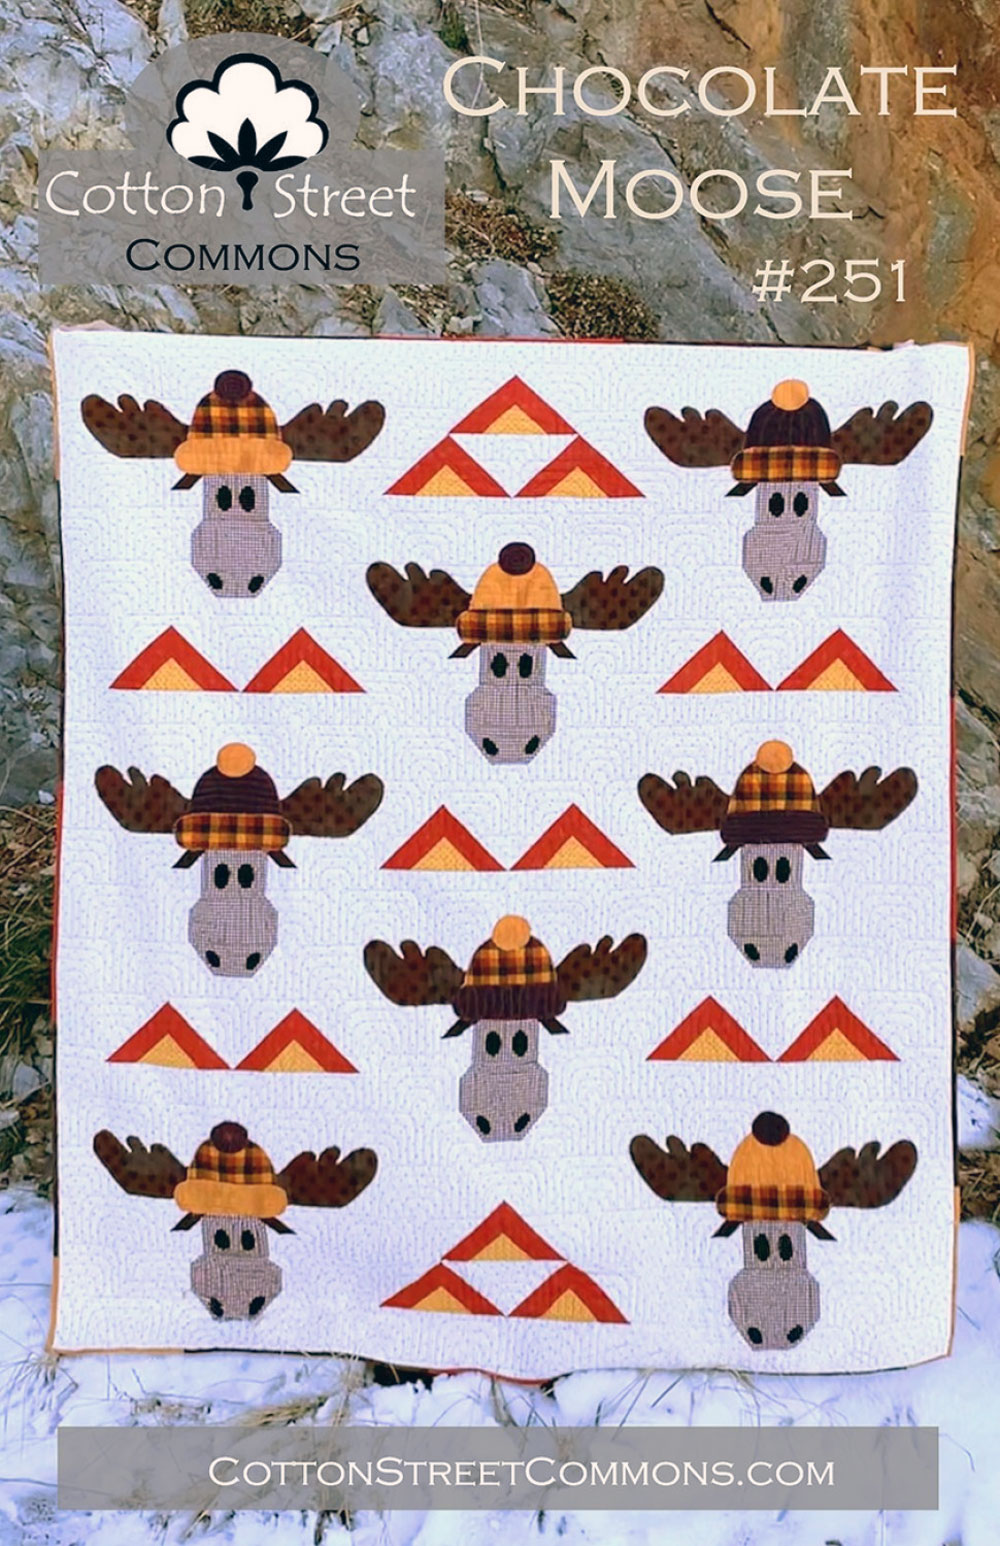 Chocolate-Moose-quilt-sewing-pattern-Cotton-Street-Commons-front